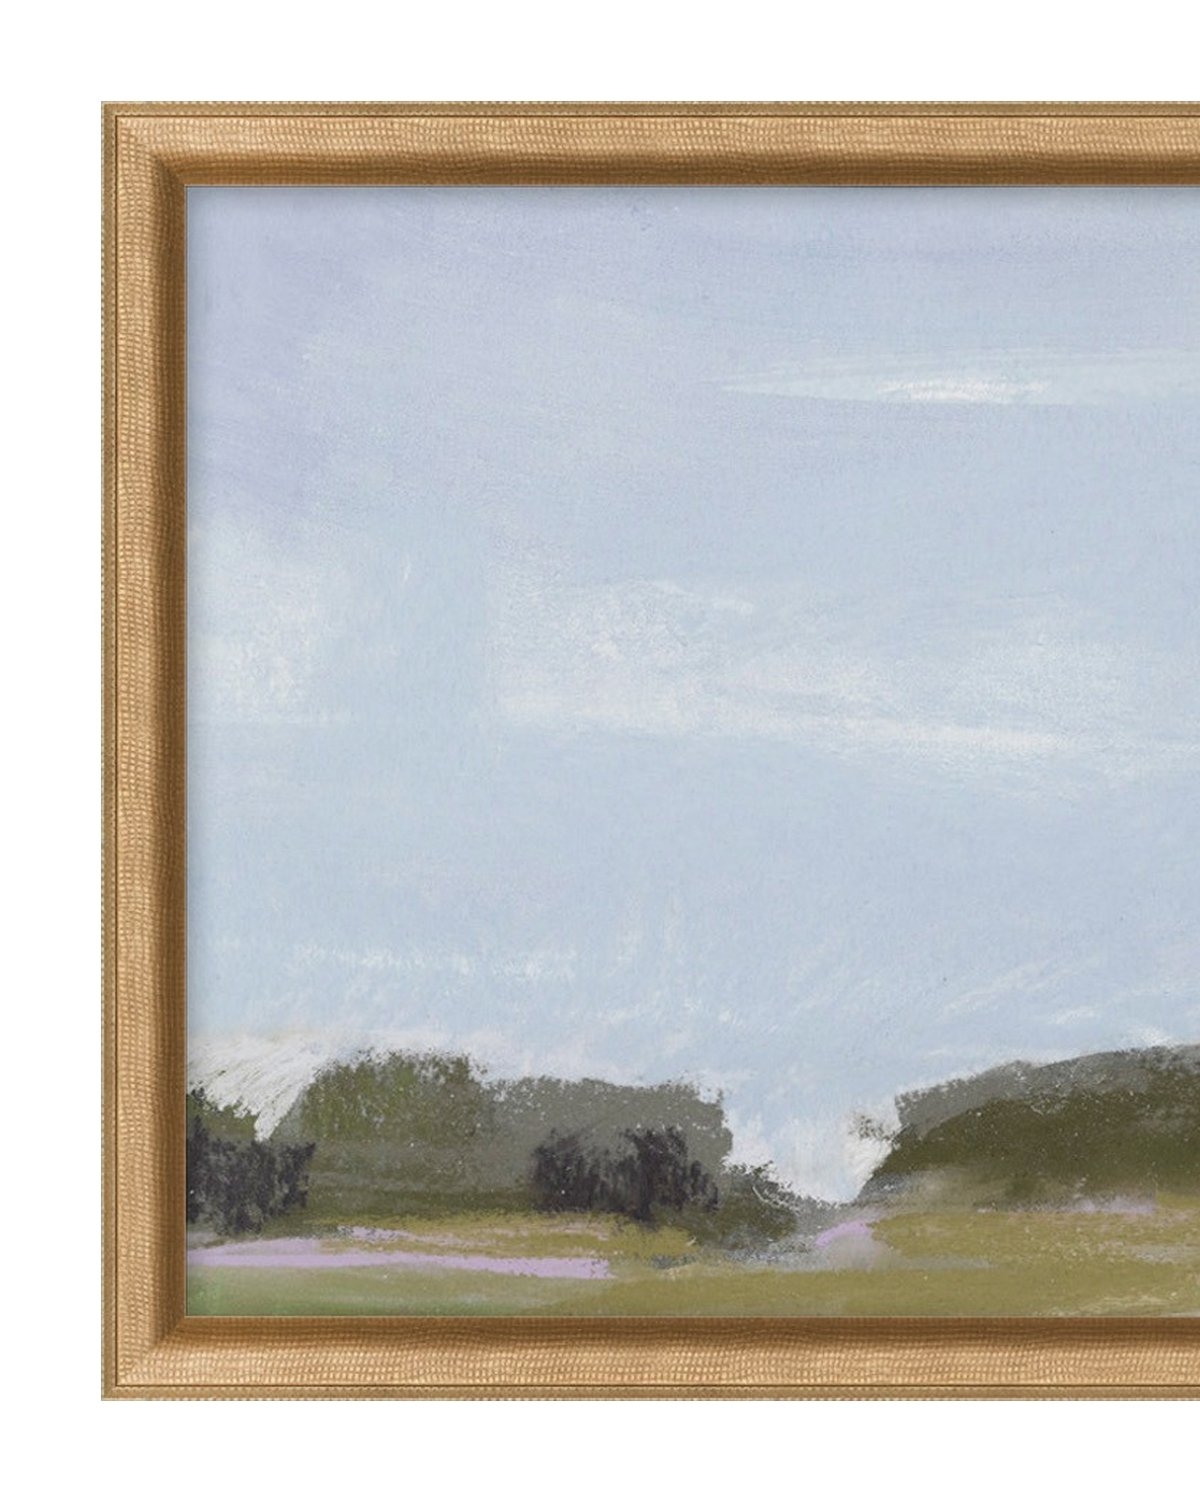 ABSTRACT LANDSCAPE 5 Framed Art - Small - Image 1